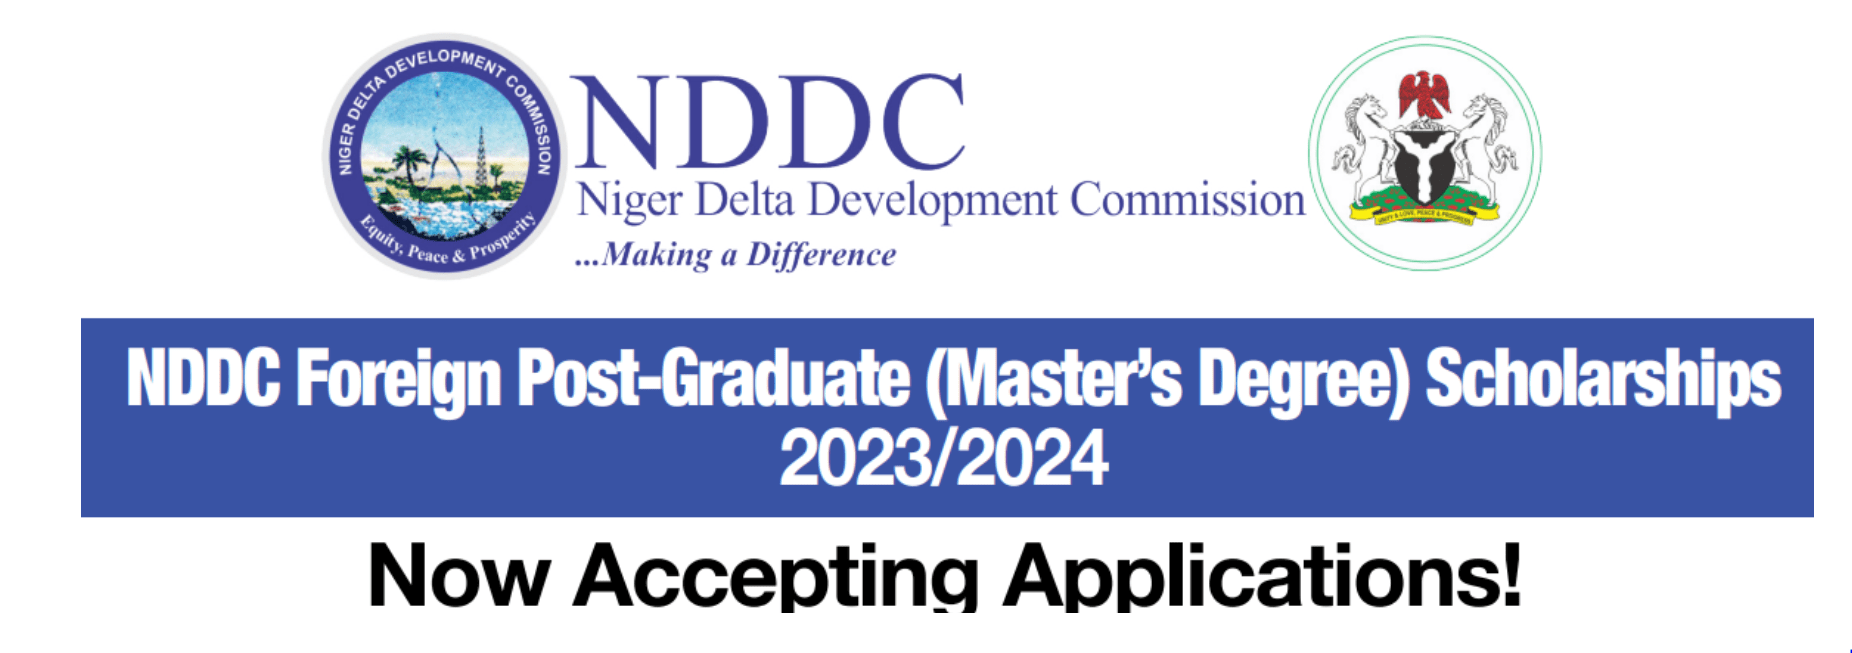 NDDC Foreign Post-Graduate Scholarships 2023/2024